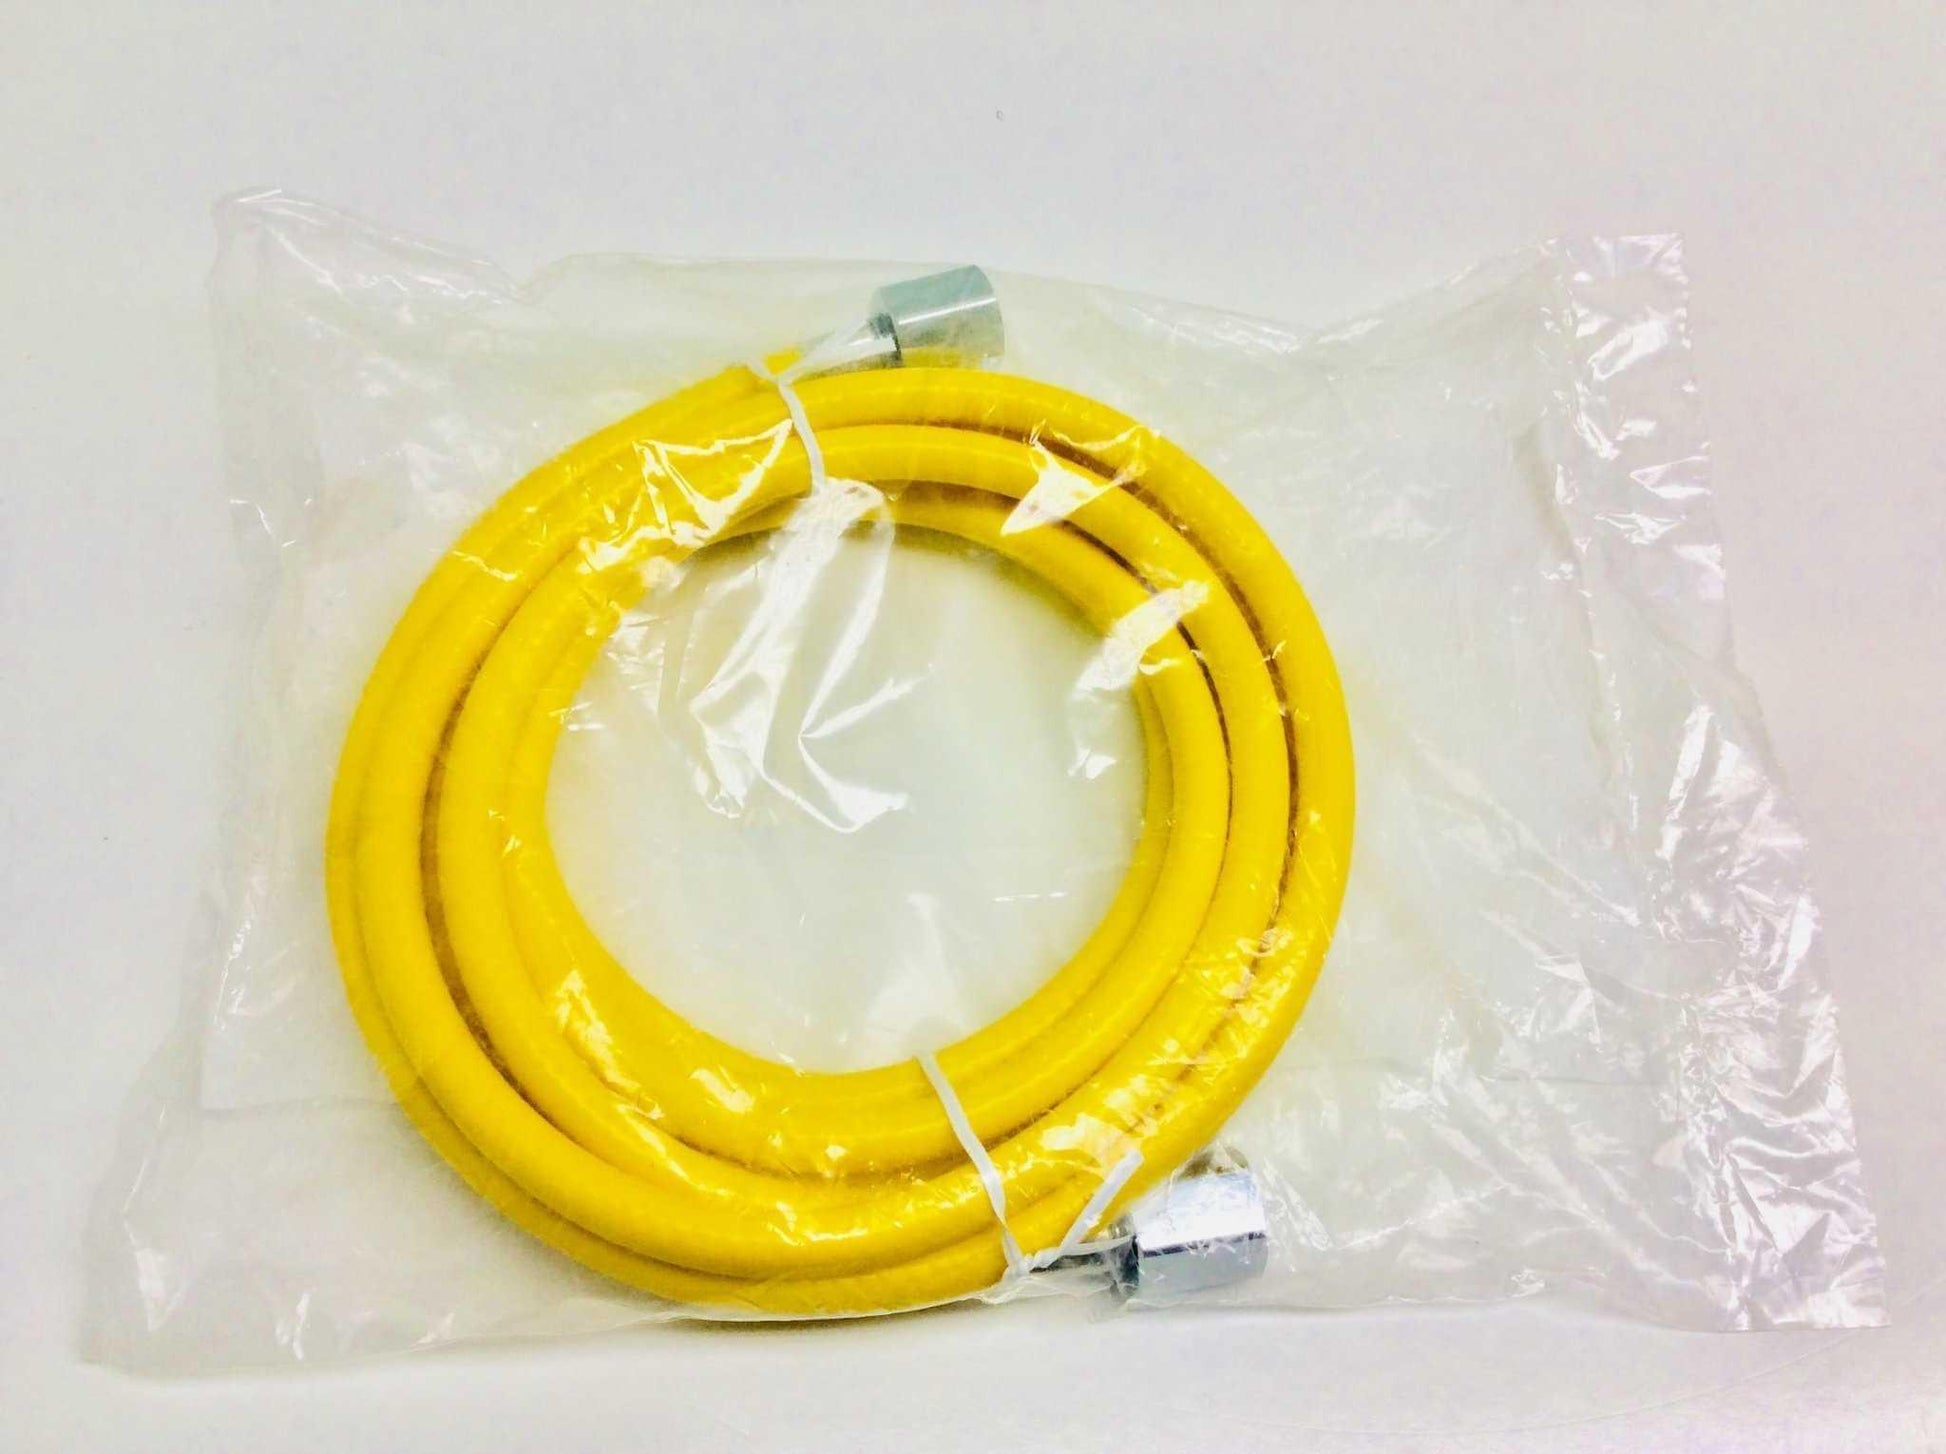 NEW Dual DISS Hex Nipple Air Hose Assembly 15 FT 02899 Warranty FREE Shipping - MBR Medicals